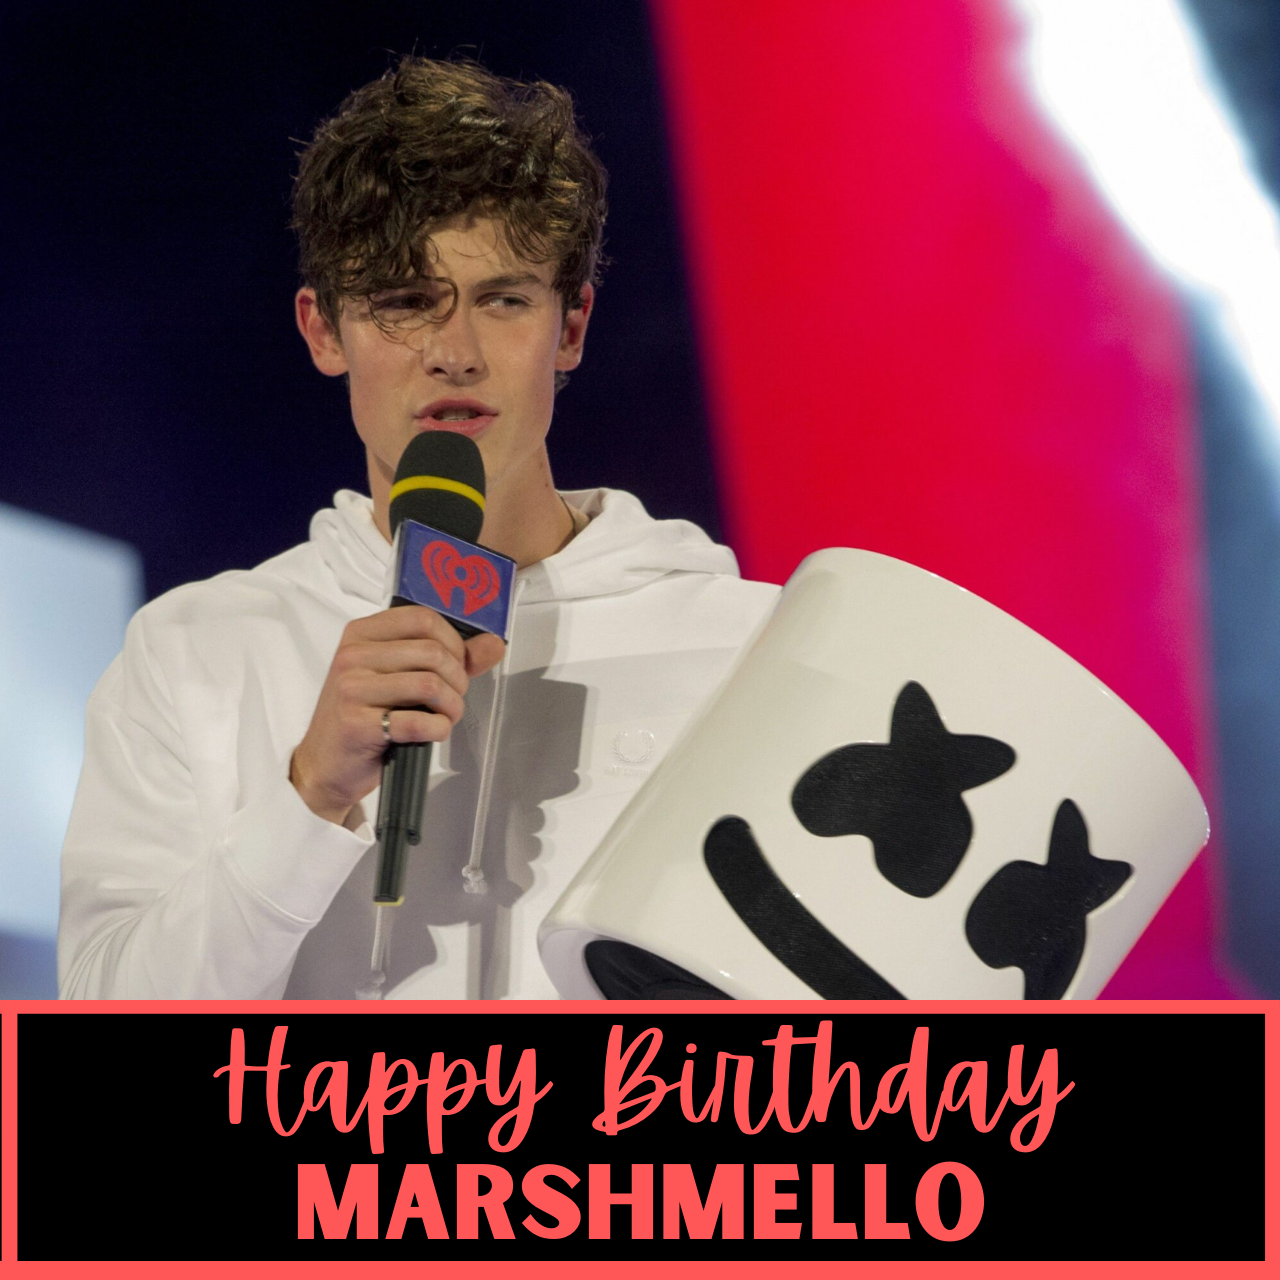 Happy Birthday Marshmello: Wishes, Quotes, Images, Messages, Greetings, Banners To Share